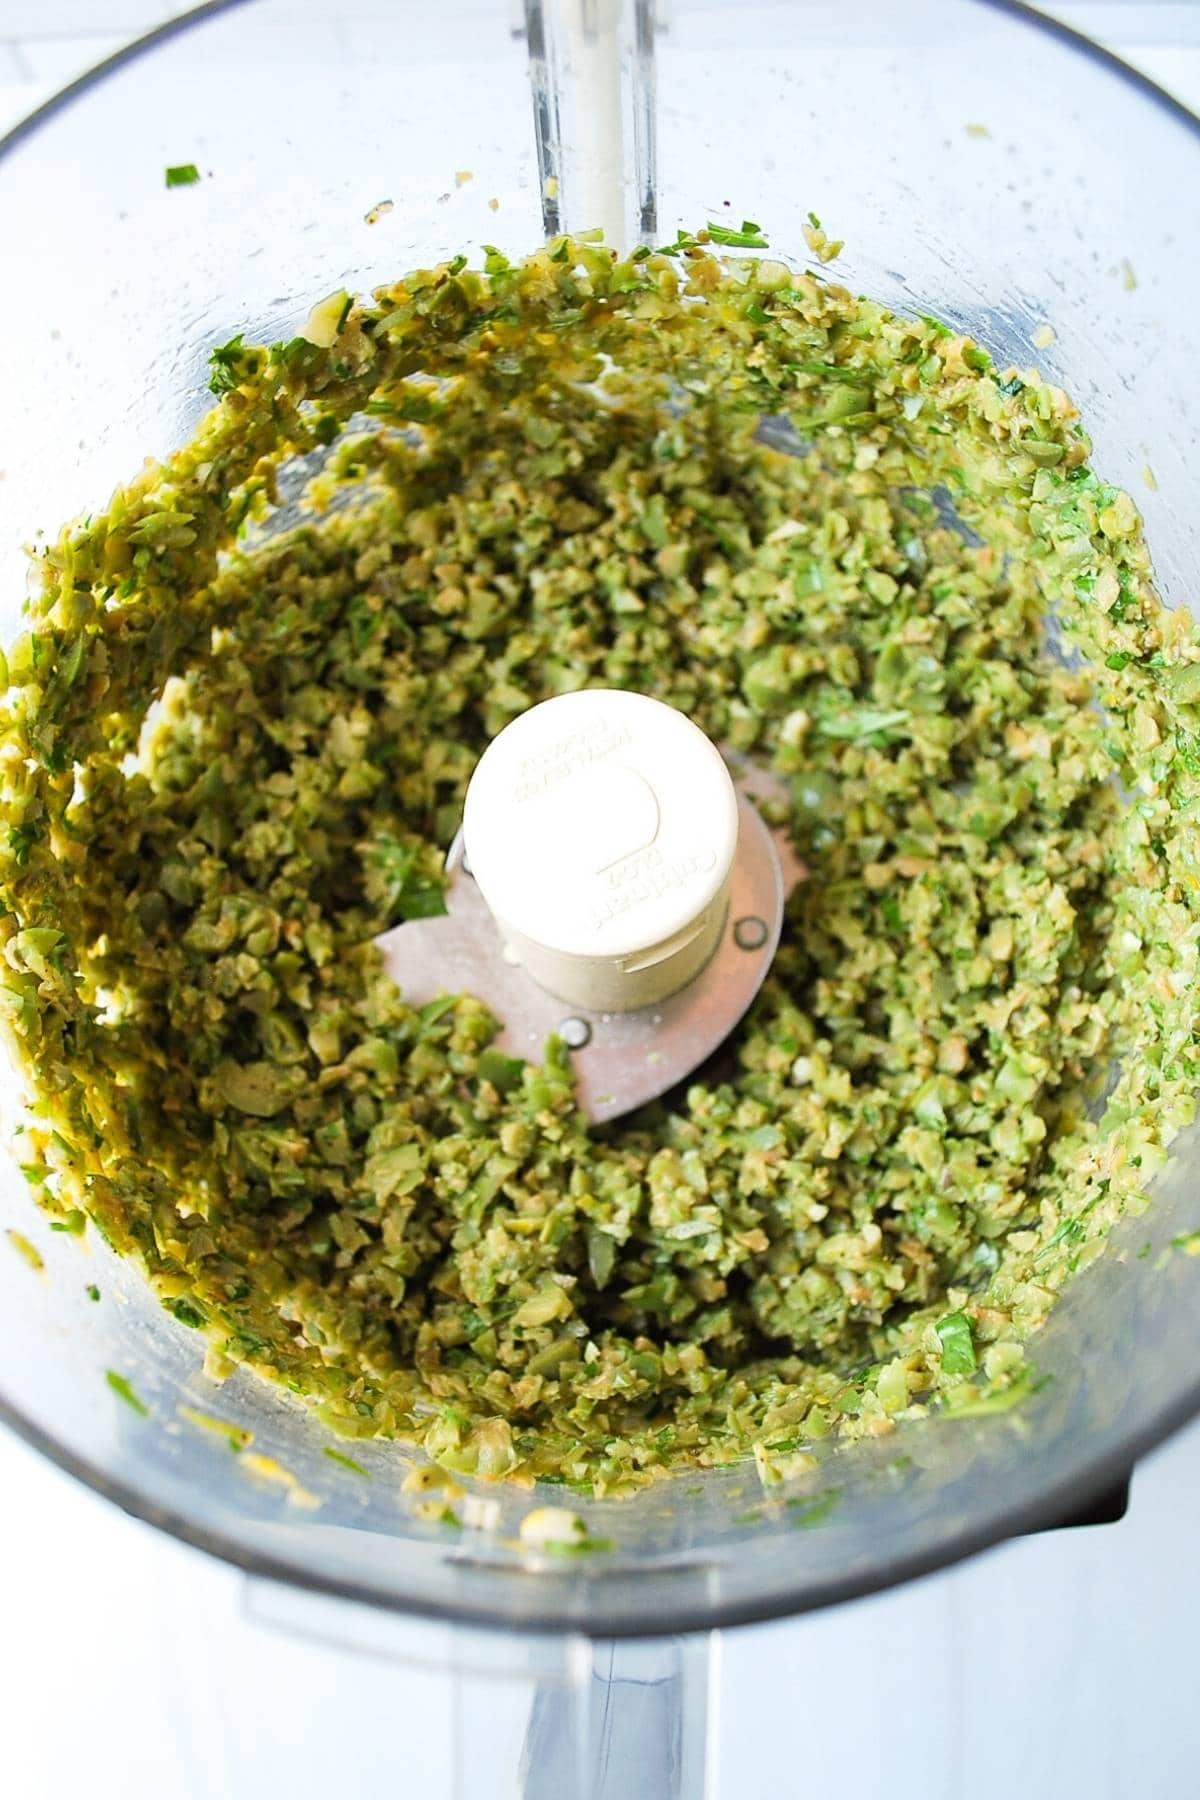 green olives, capers, lemon, and herbs pulsed in a food processor.